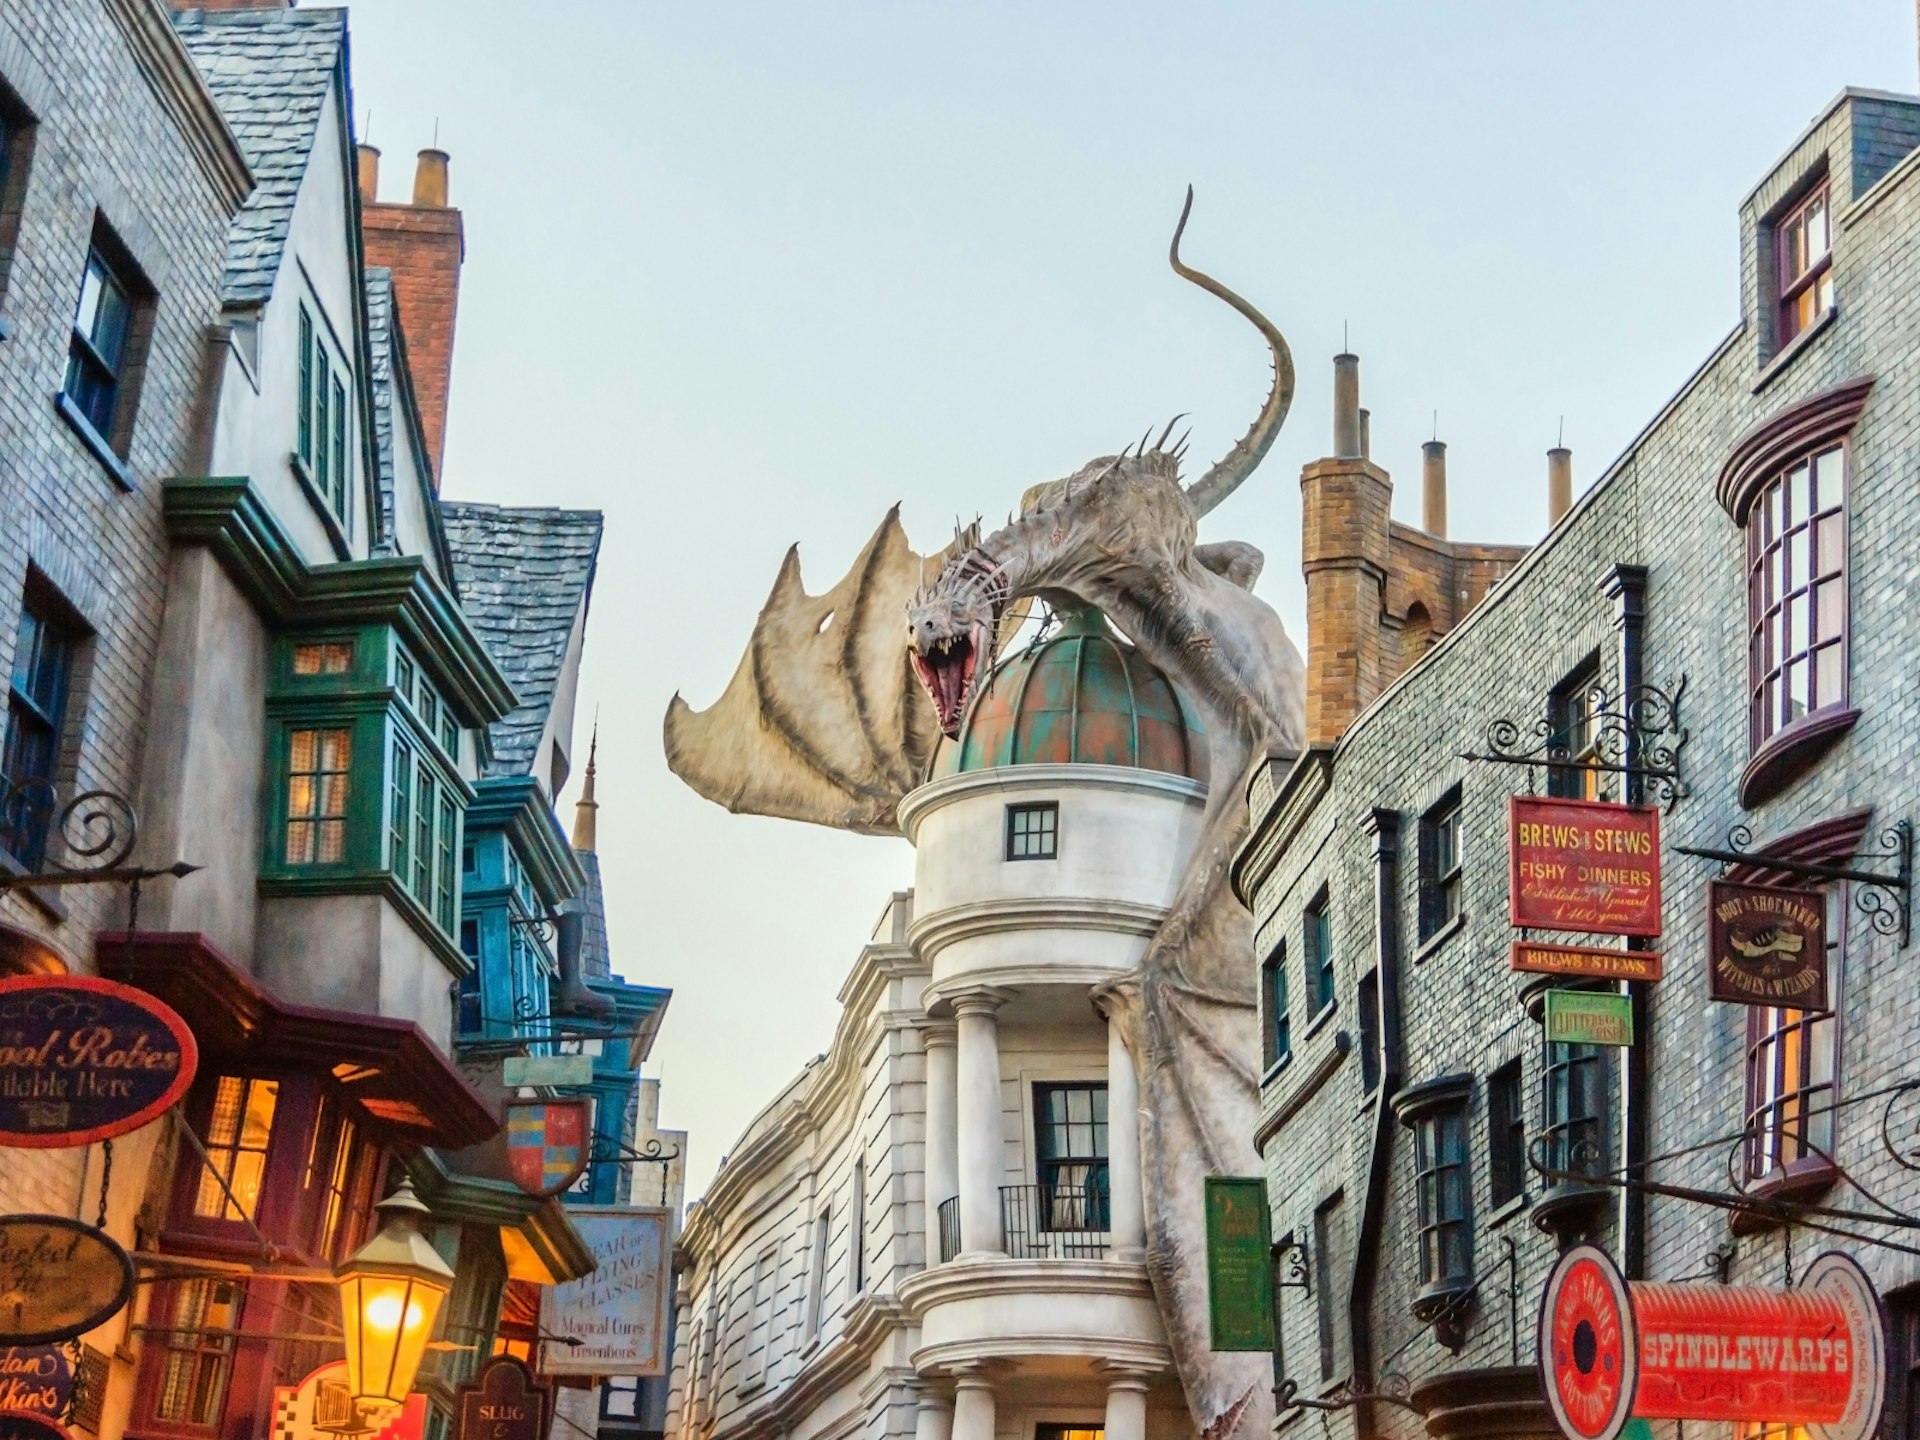 A dragon sits on the roof of a domed roof of Gringotts Banks at The Wizarding World of Harry Potter set at Universal Studios, Florida